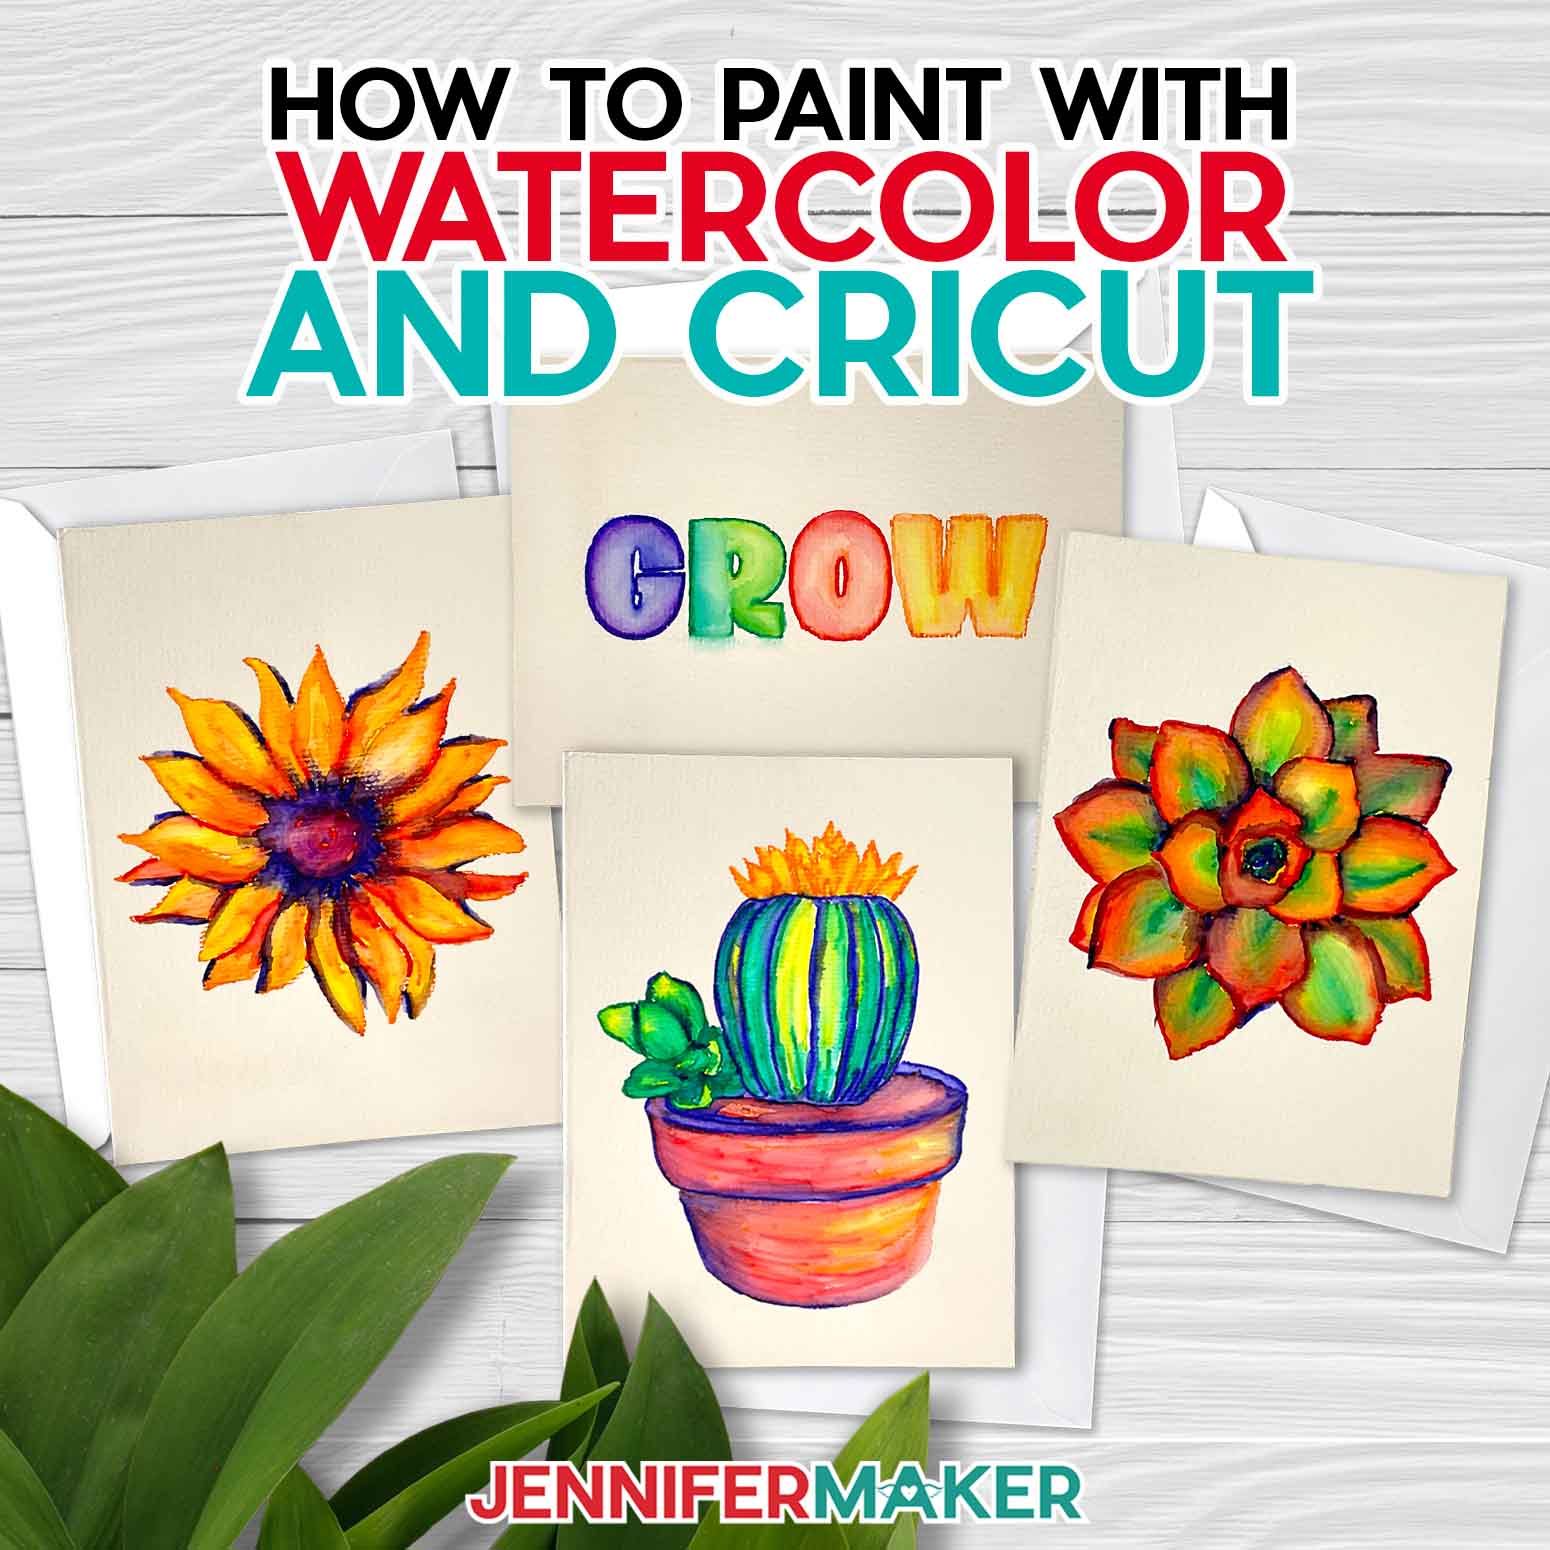 Learn how to use Cricut watercolor markers with JenniferMaker's tutorial!